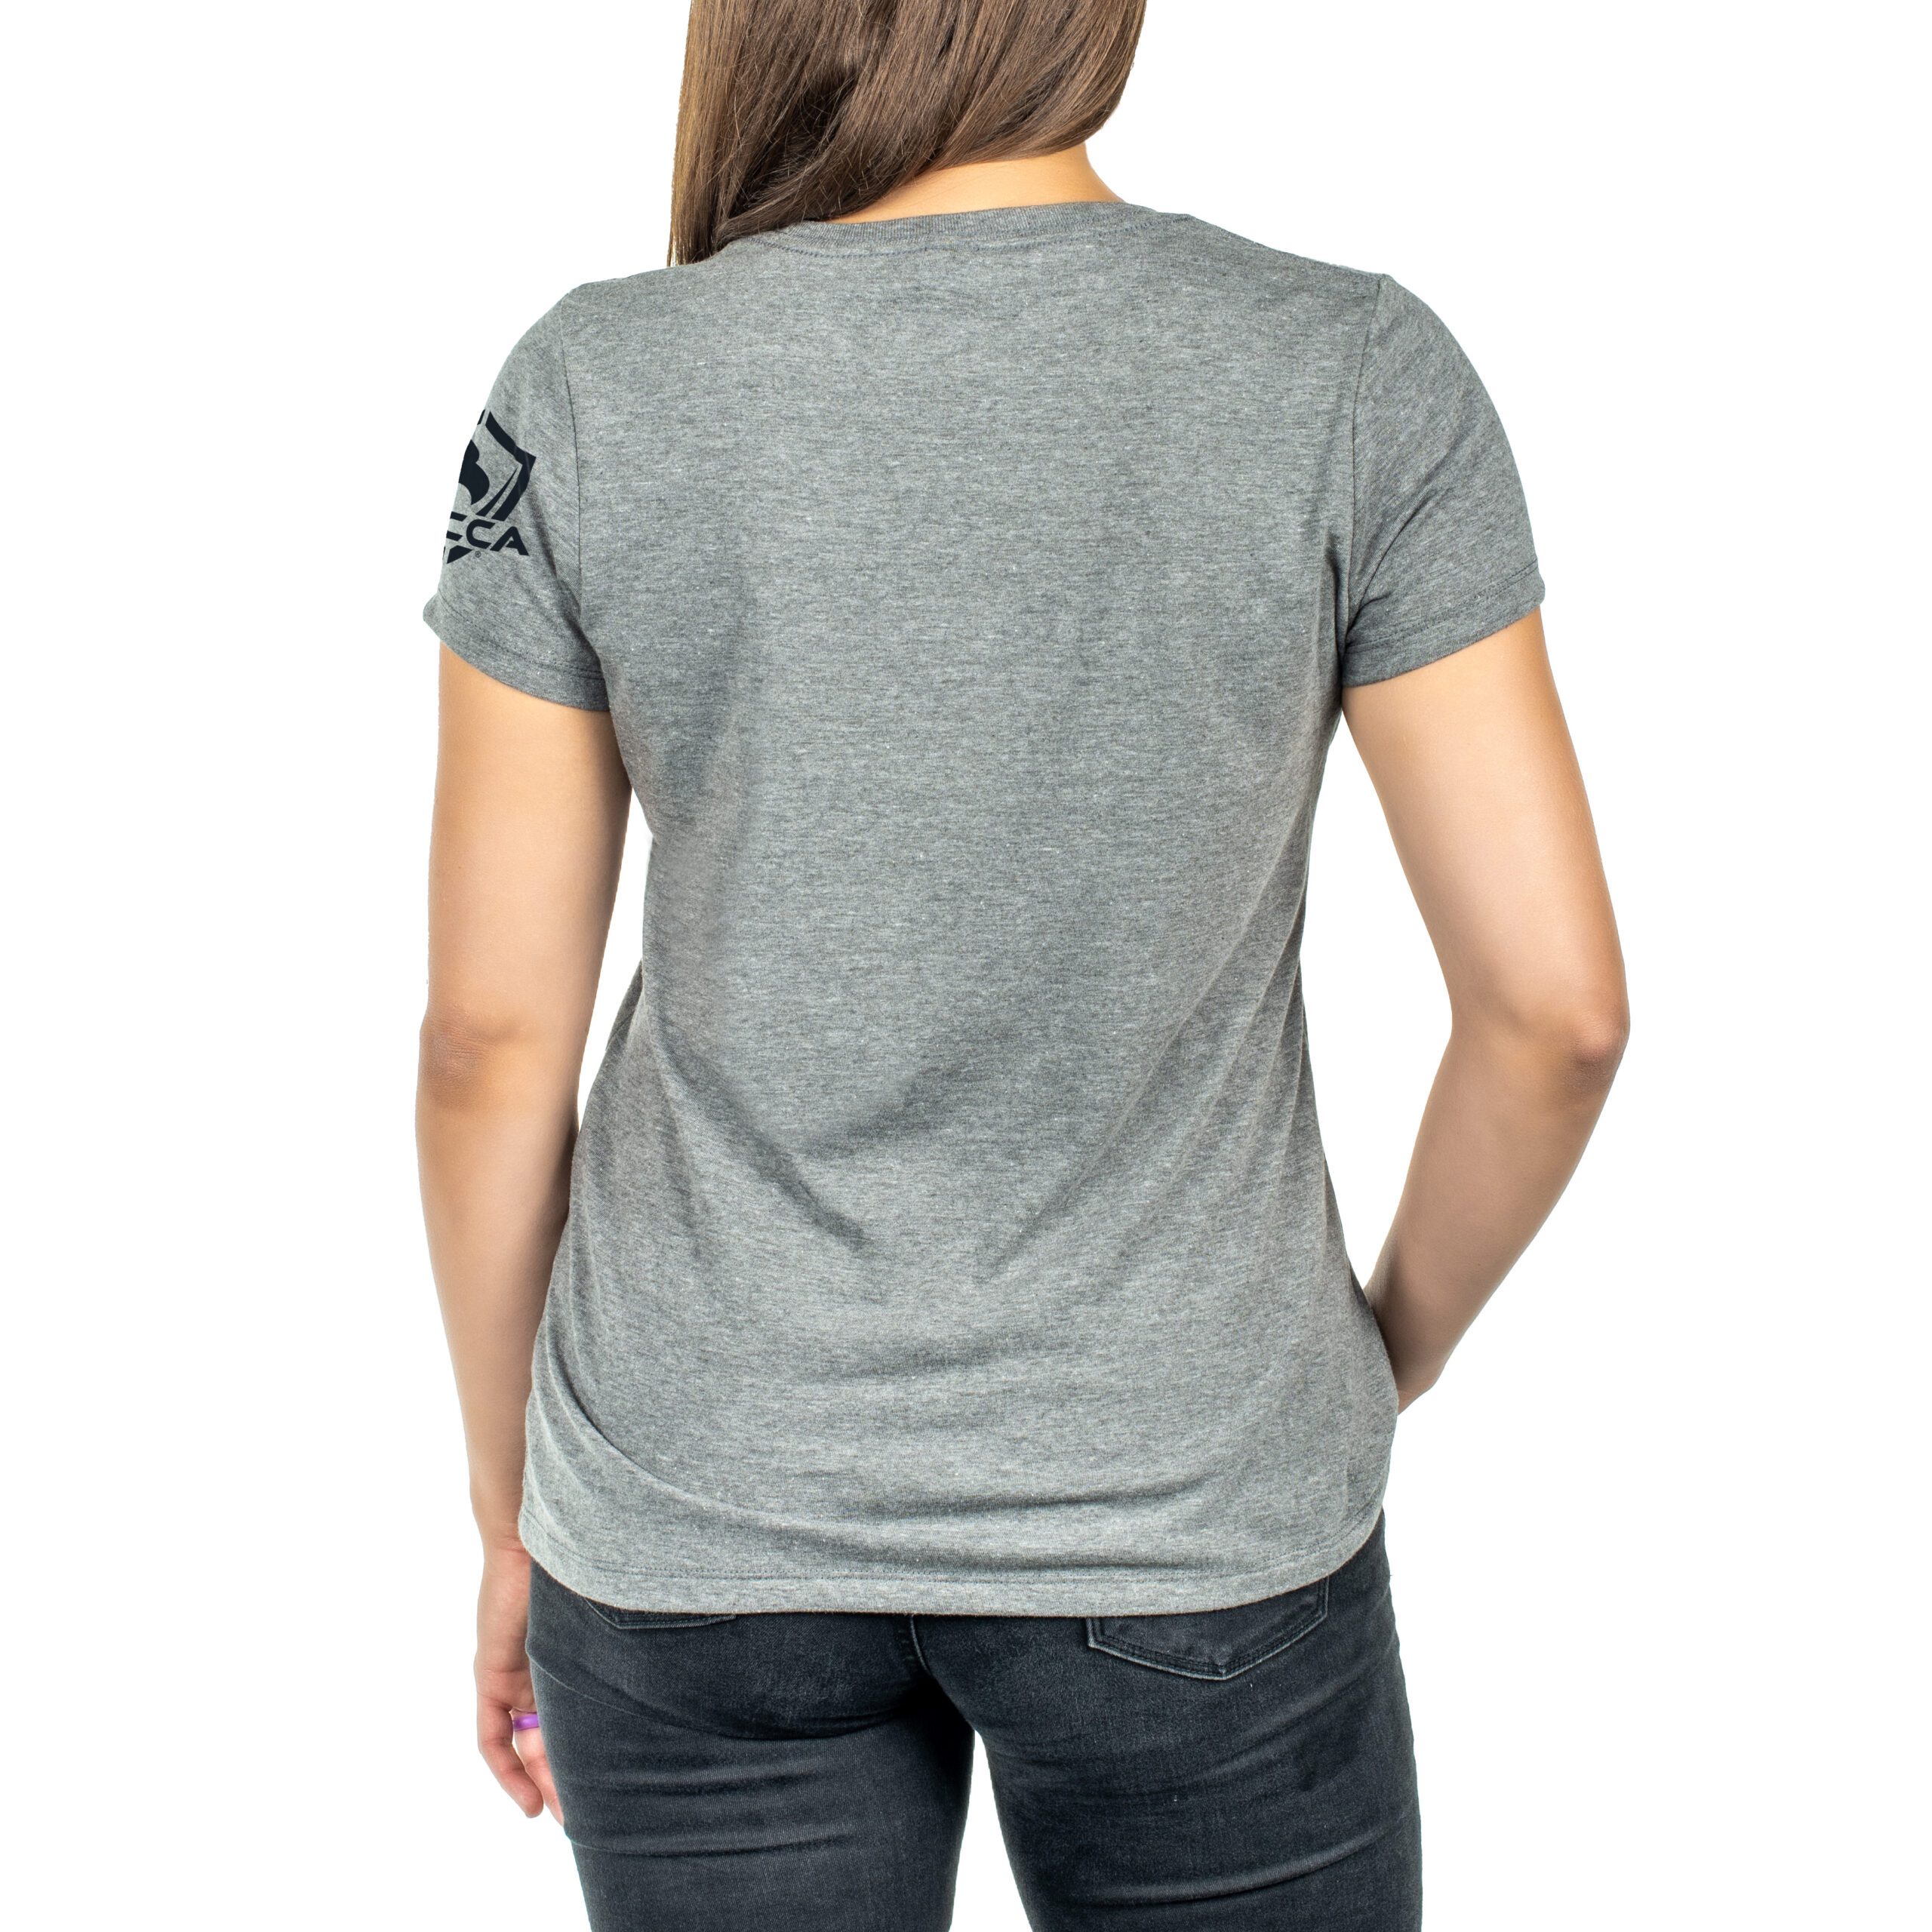 USCCA Women's Carry Confidence Iconic T-Shirt - USCCA Store